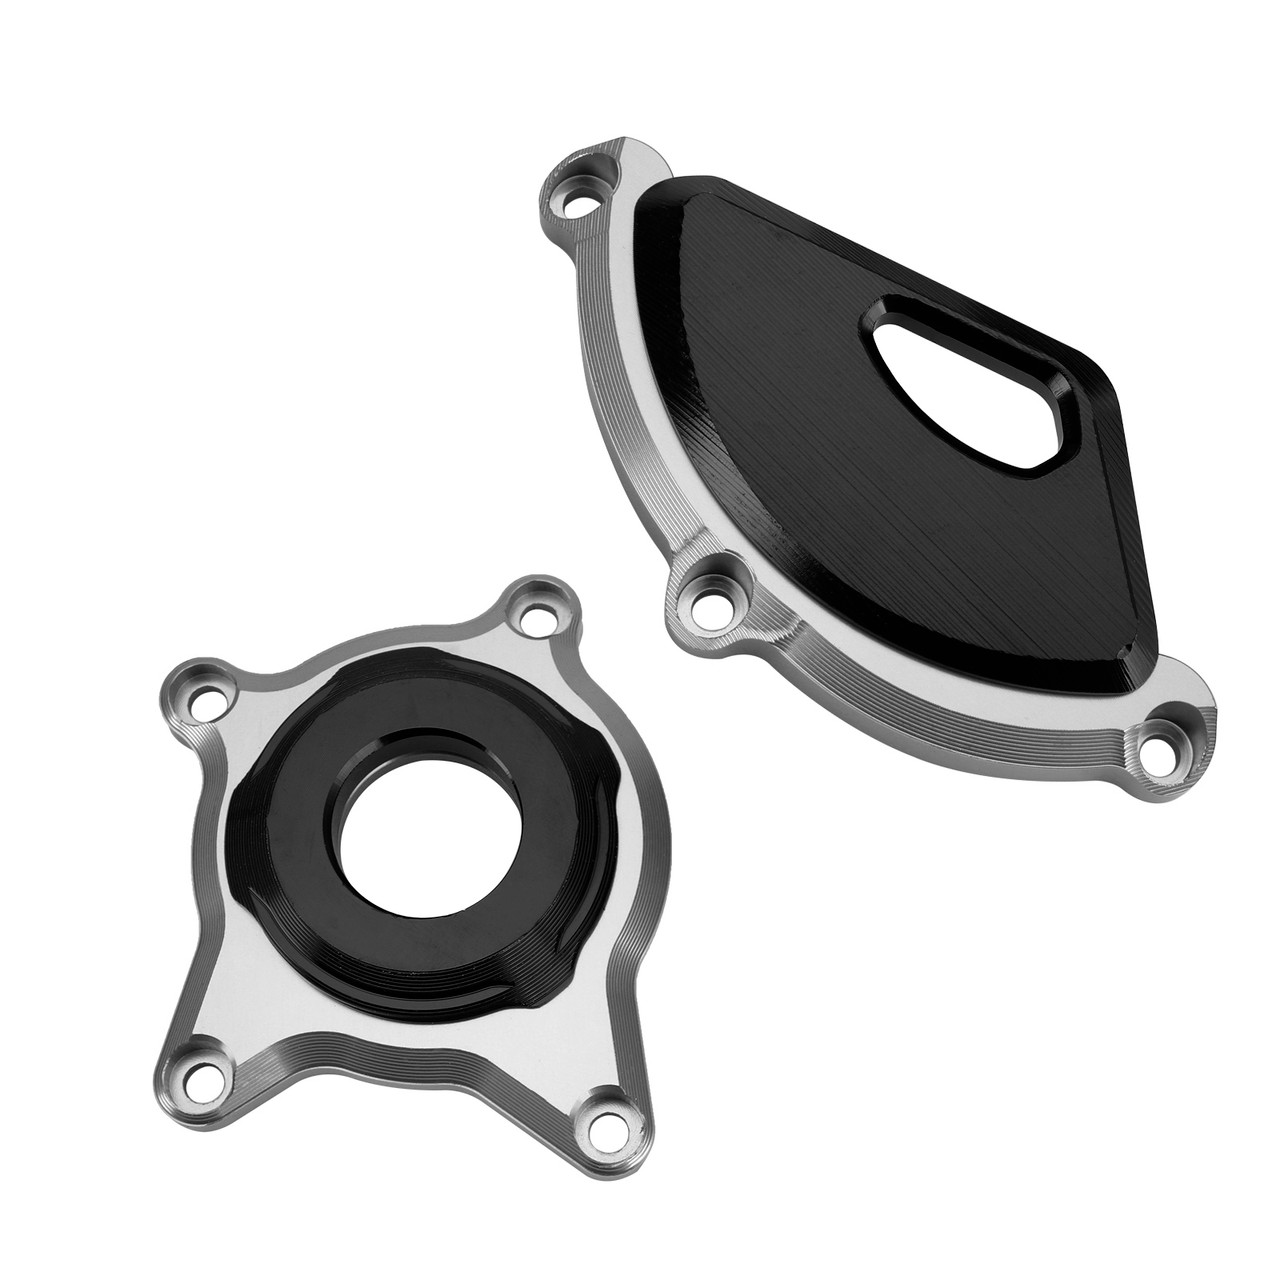 Plastic Engine Protector Covers Slider Titanium For Kawasaki Z900 Rs Cafe 17-23